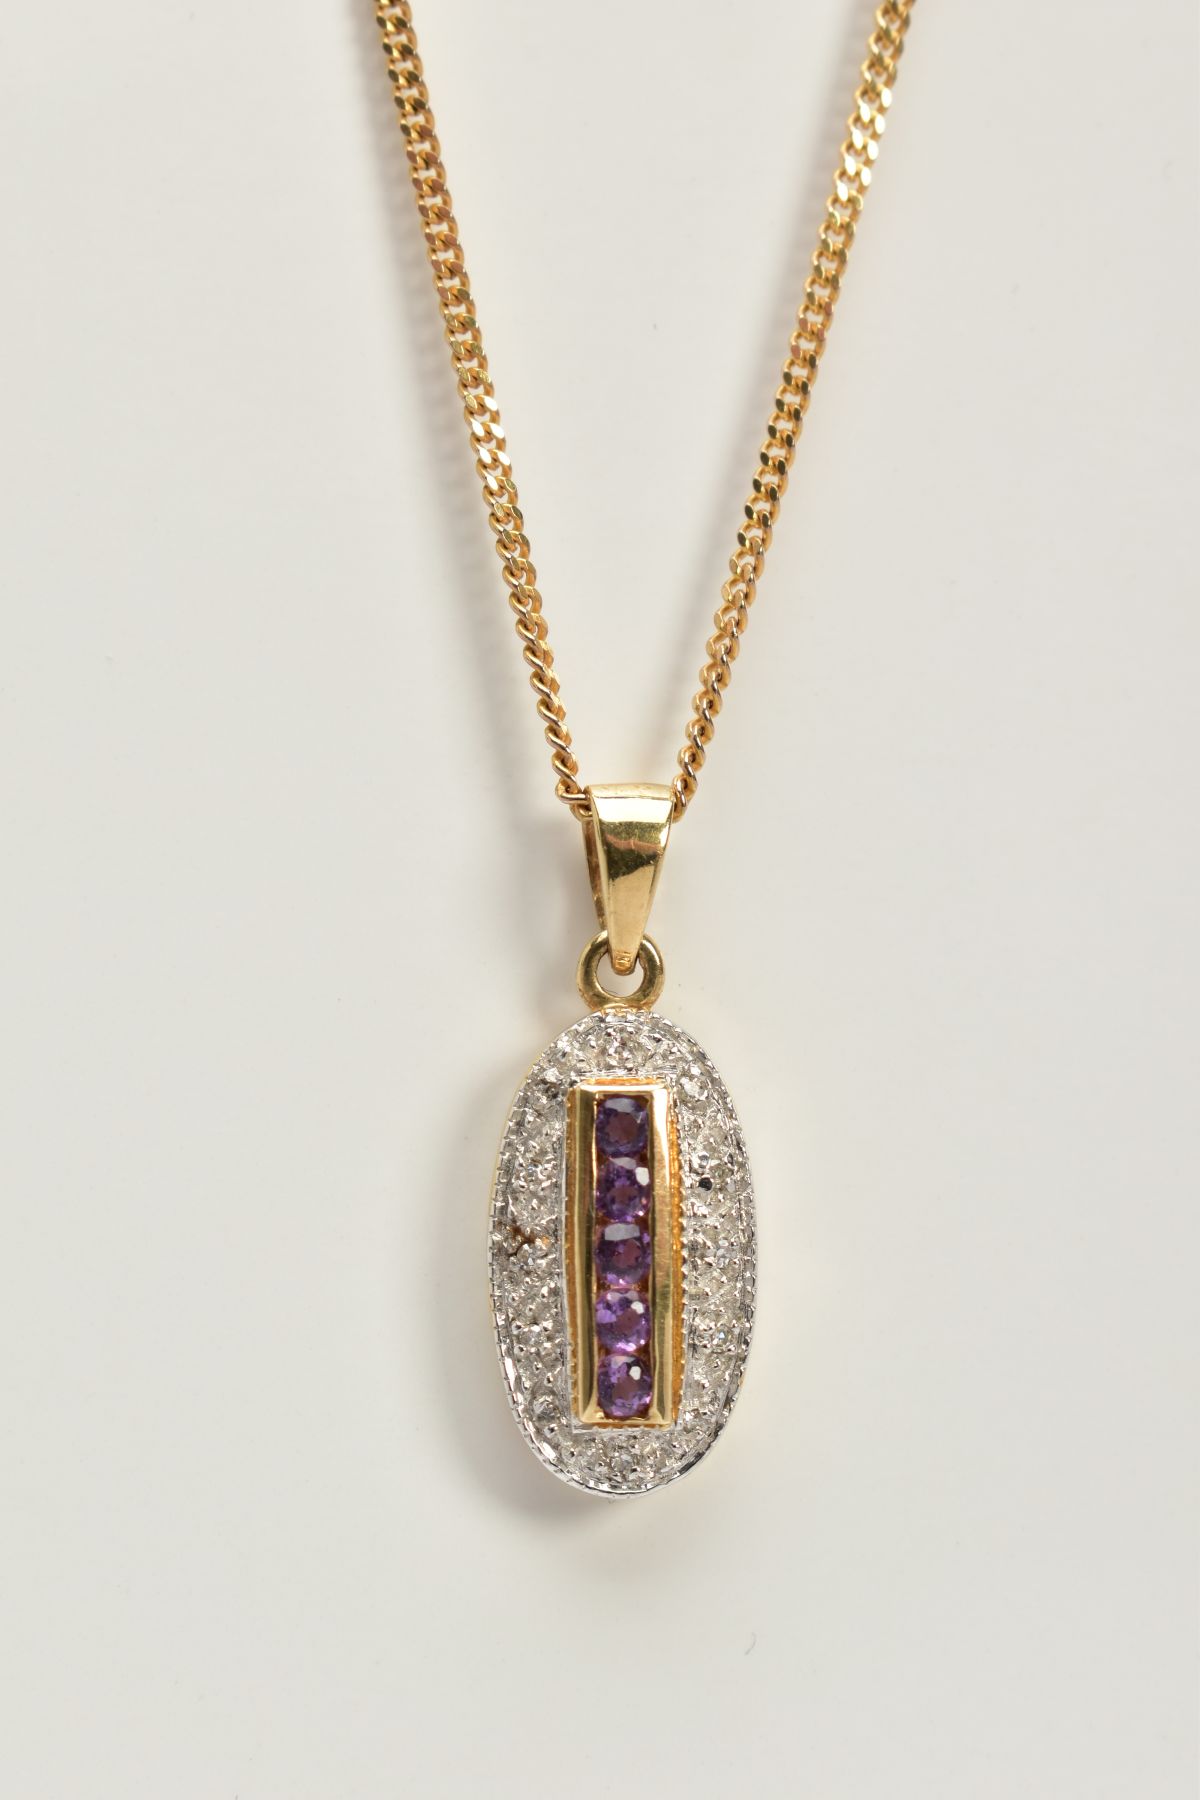 A 9CT GOLD AMETHYST AND DIAMOND PENDANT NECKLACE, the oval pendant designed with a central row of - Image 3 of 3